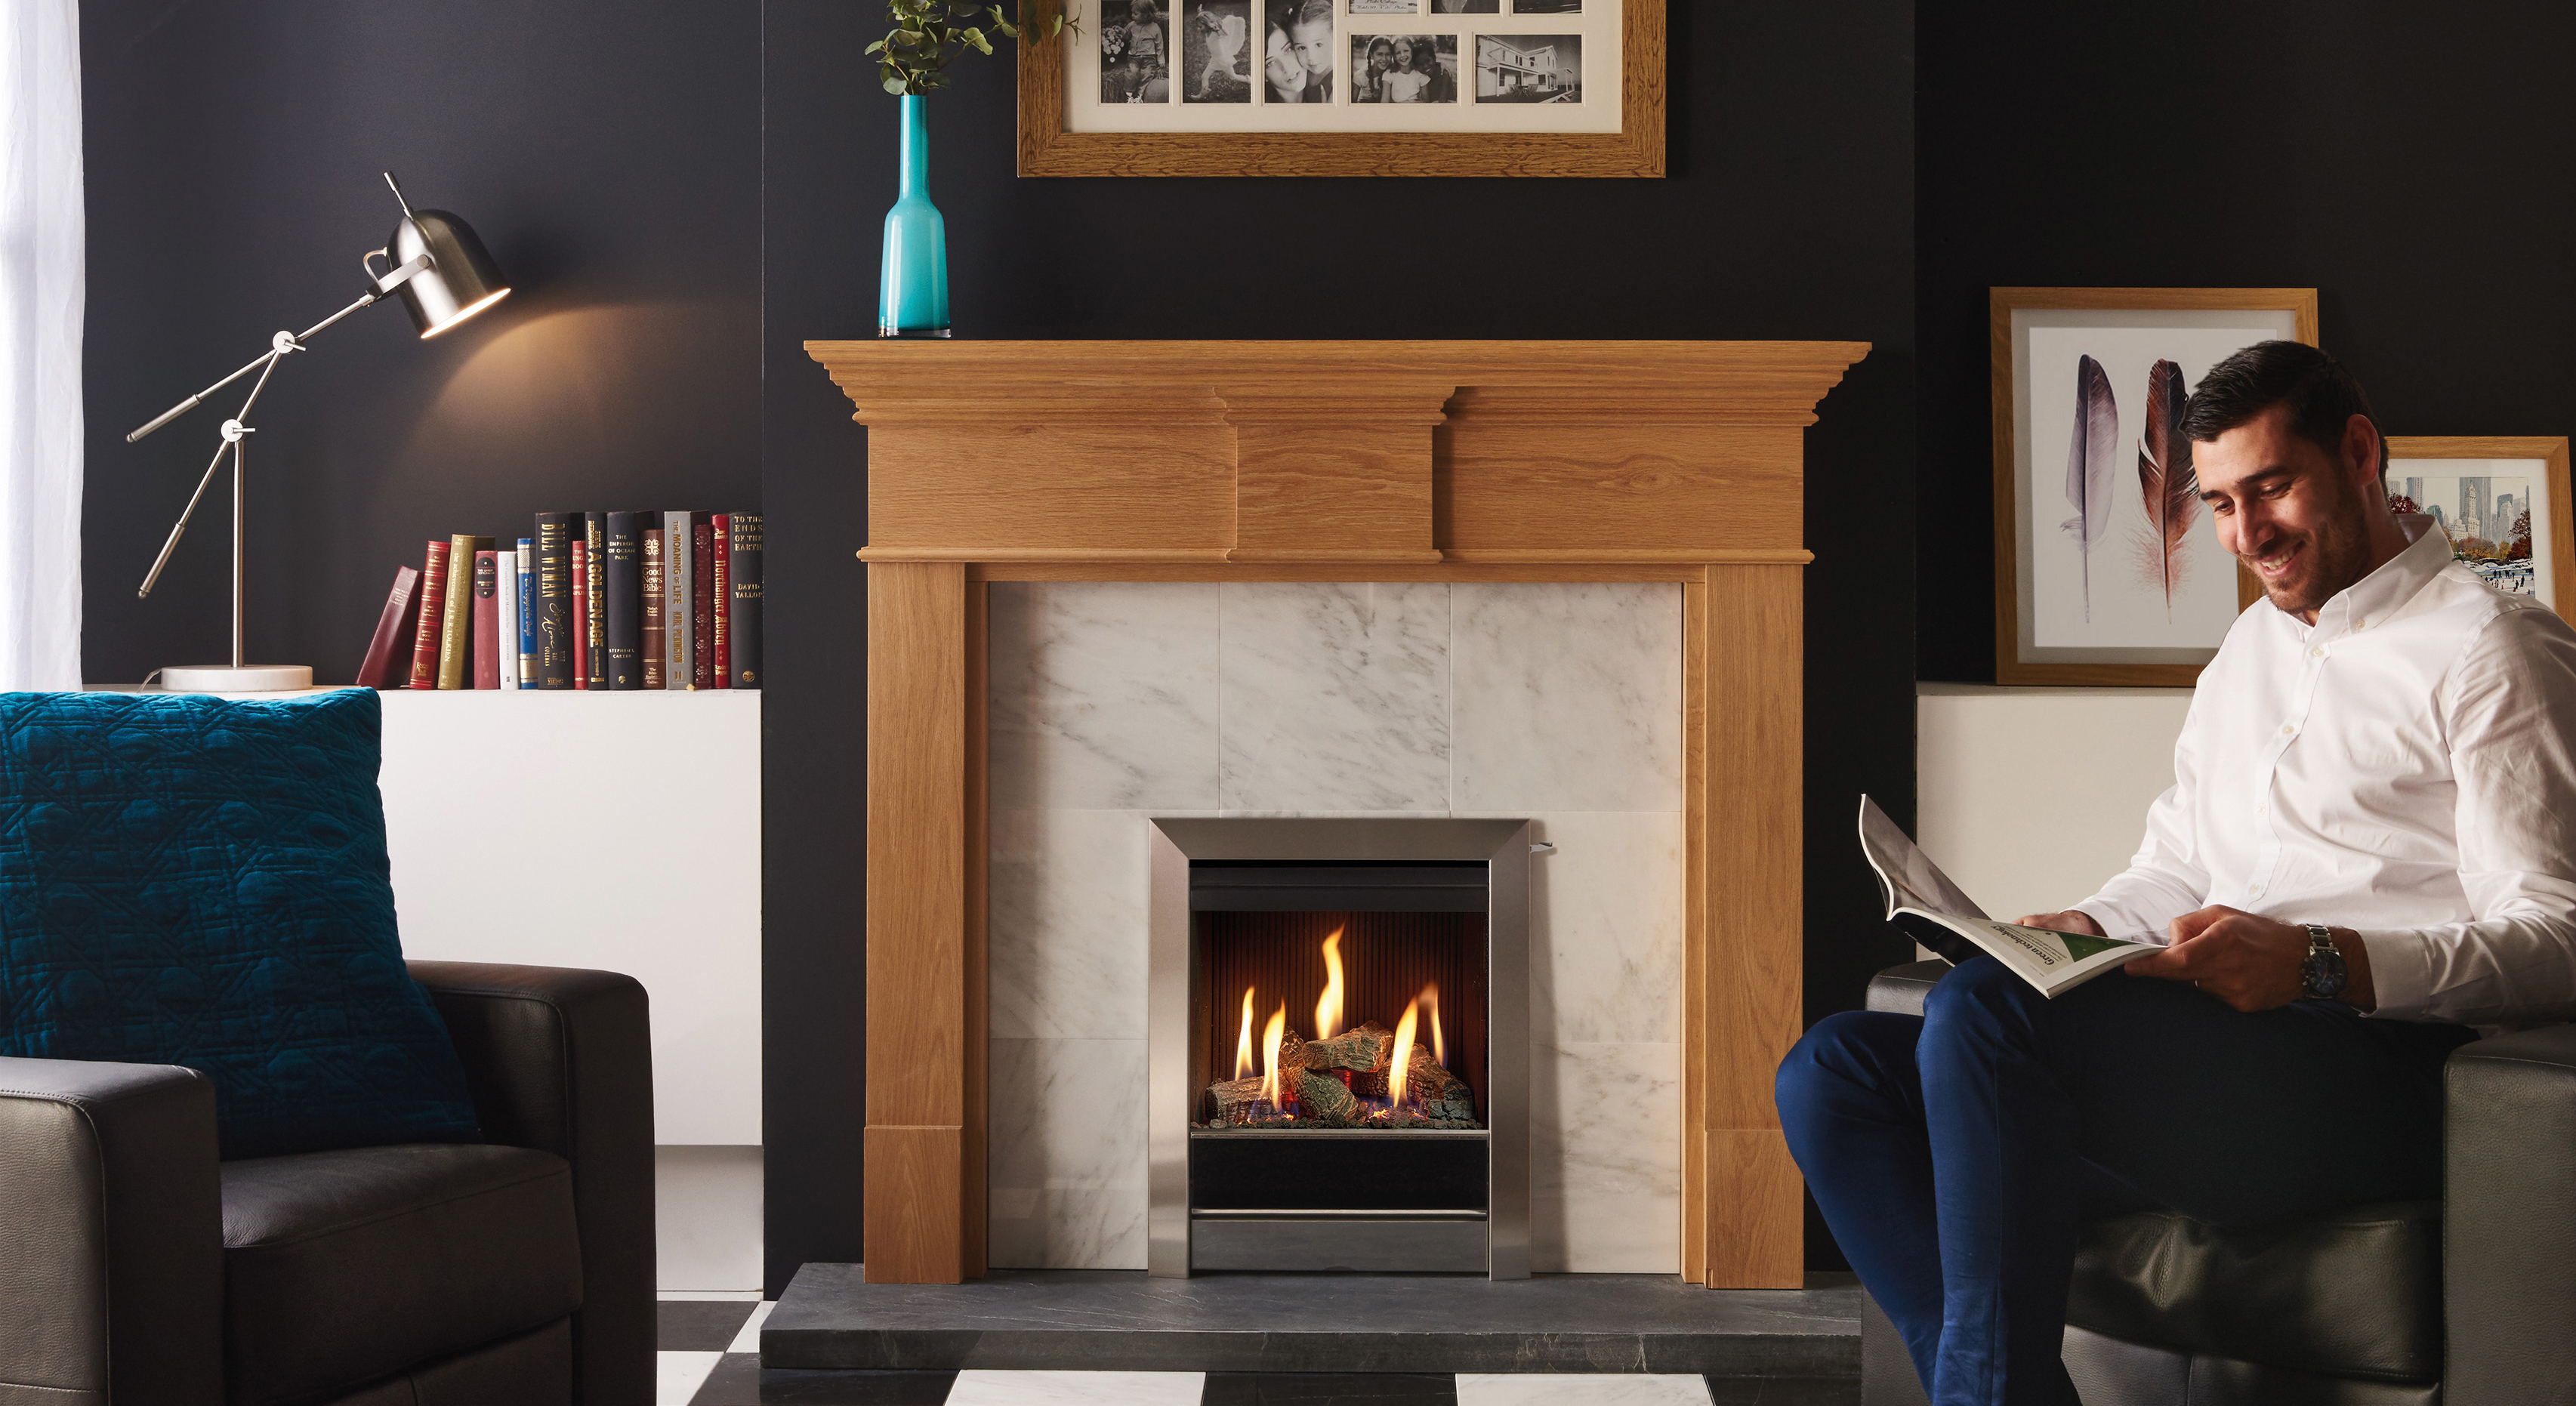 Gazco Logic™ HE Conventional flue fire with Log-effect fuel bed and Brushed Stainless Tempo front. Also shown Pembroke Roach Oak mantel from Stovax.